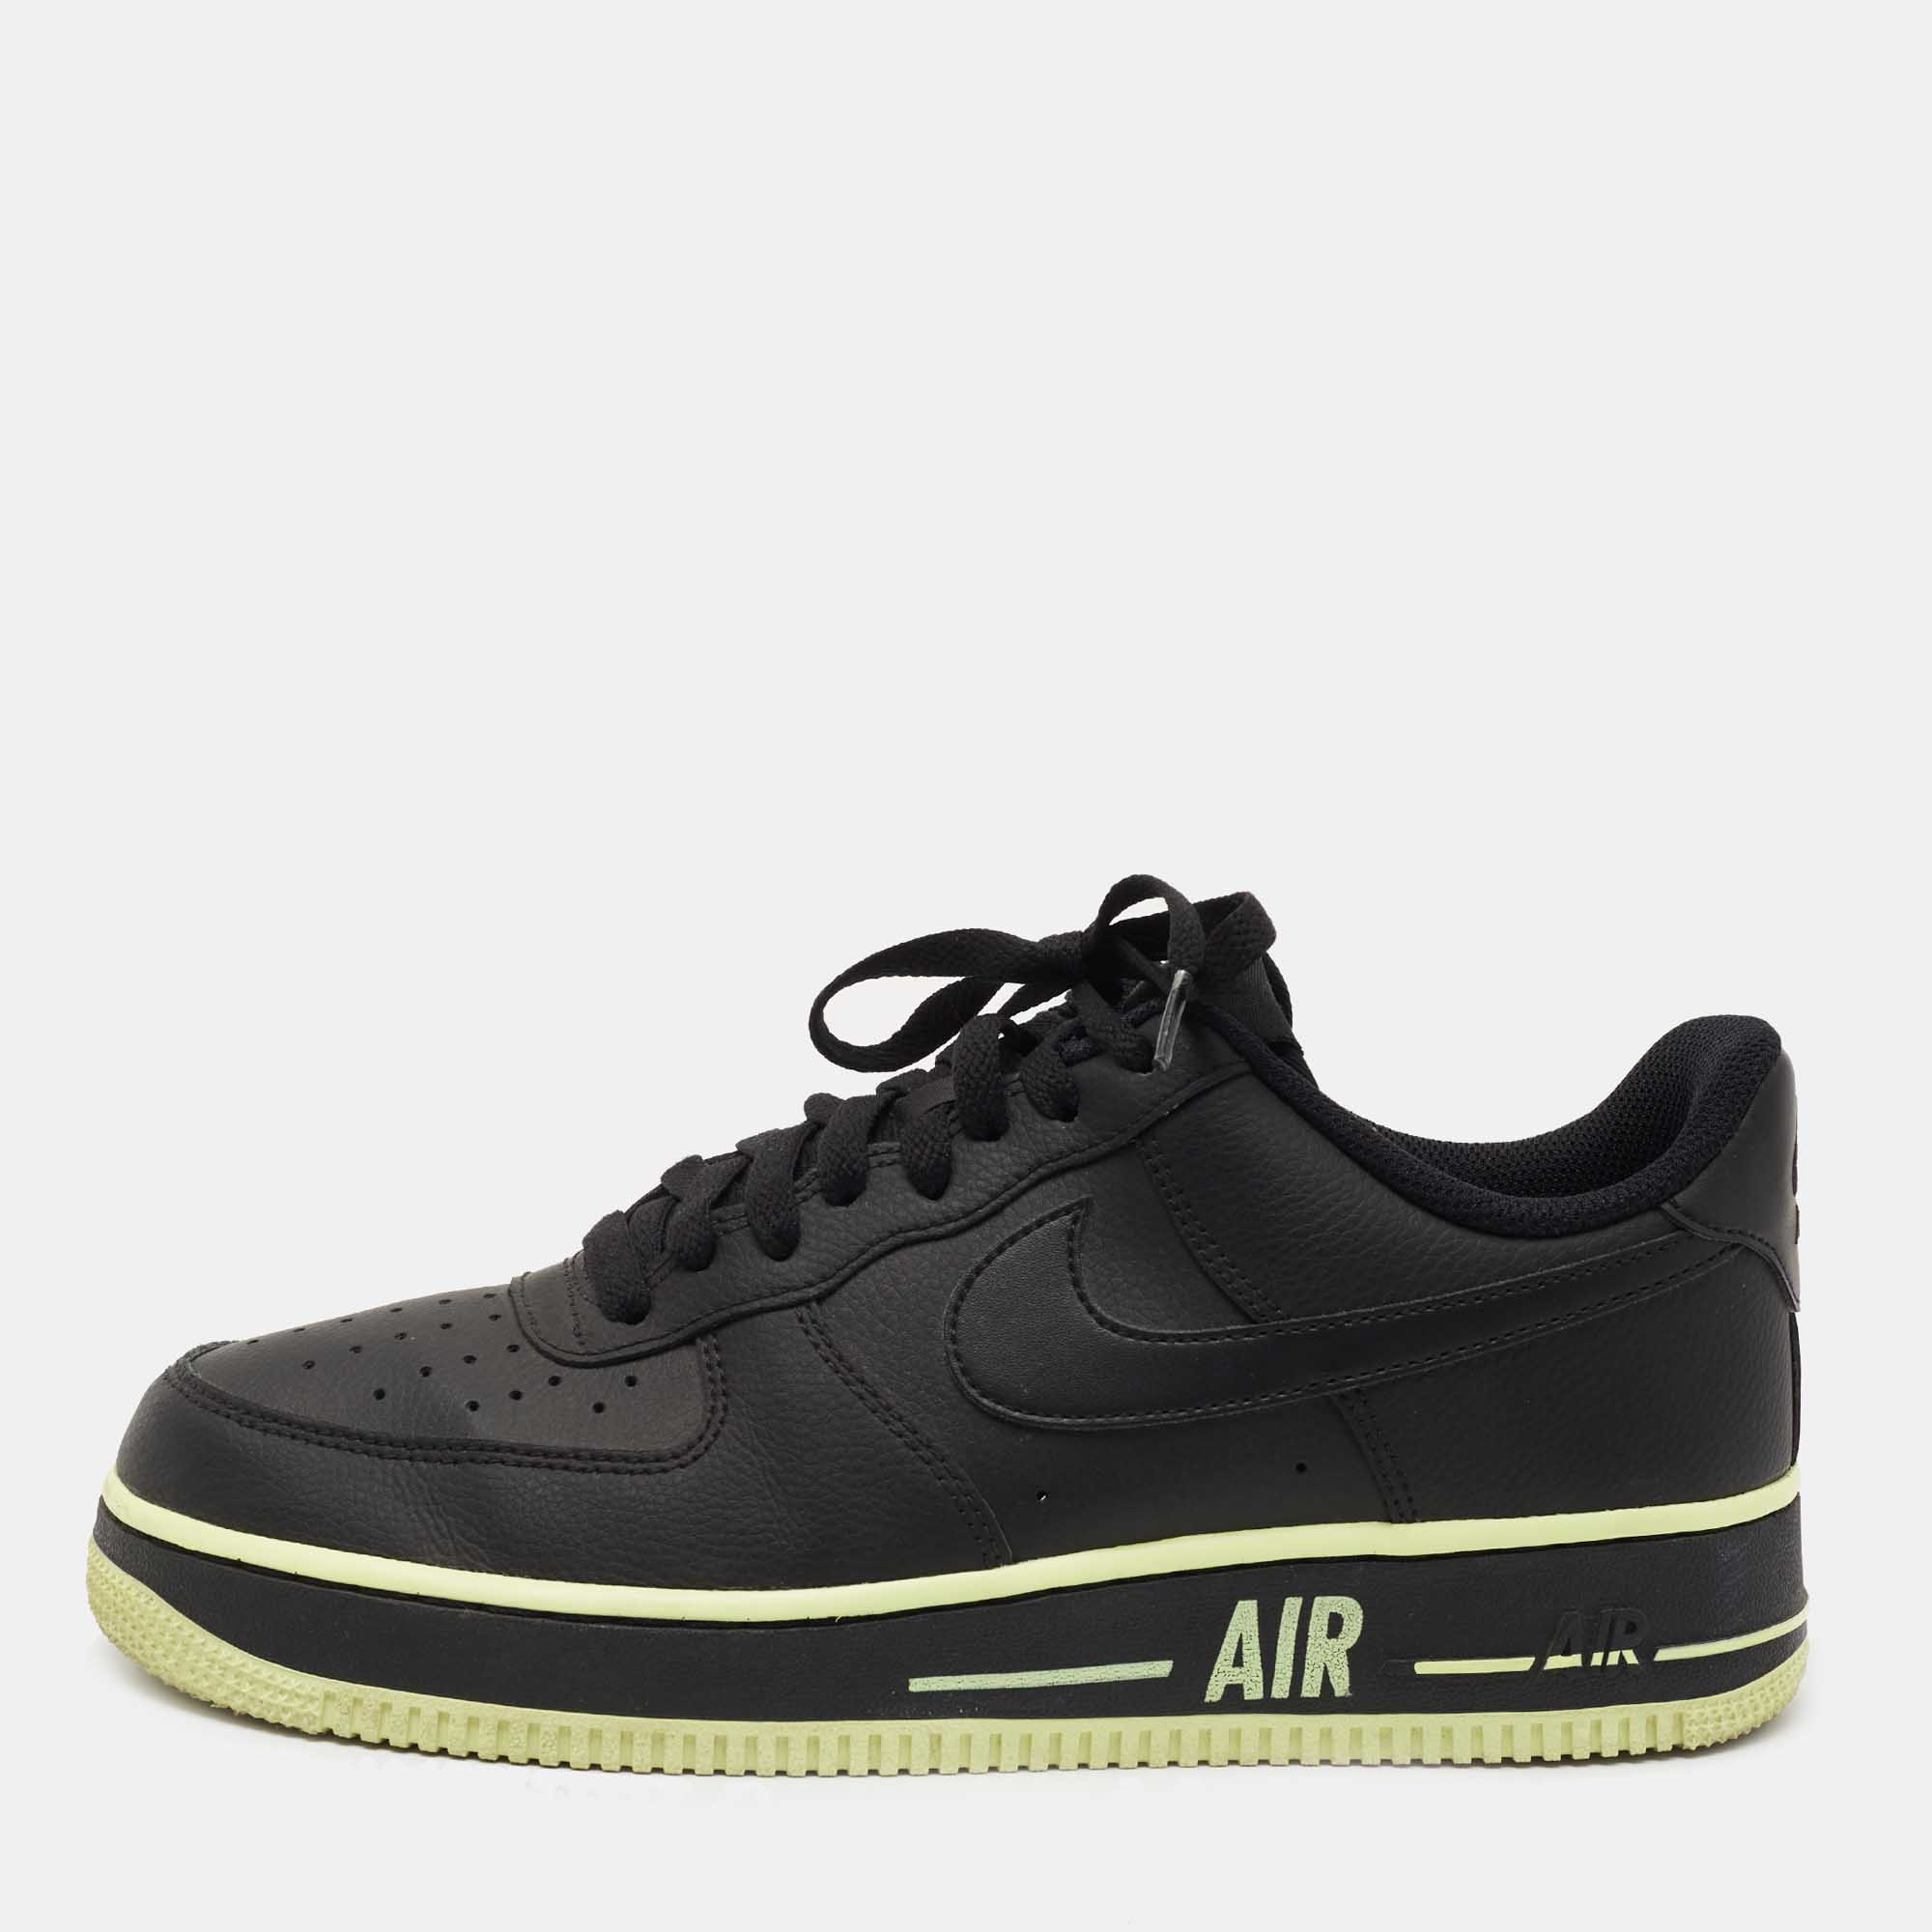 Pre-owned Nike Air Force 1 Black Leather Low Black Volt Sneakers Size 42.5